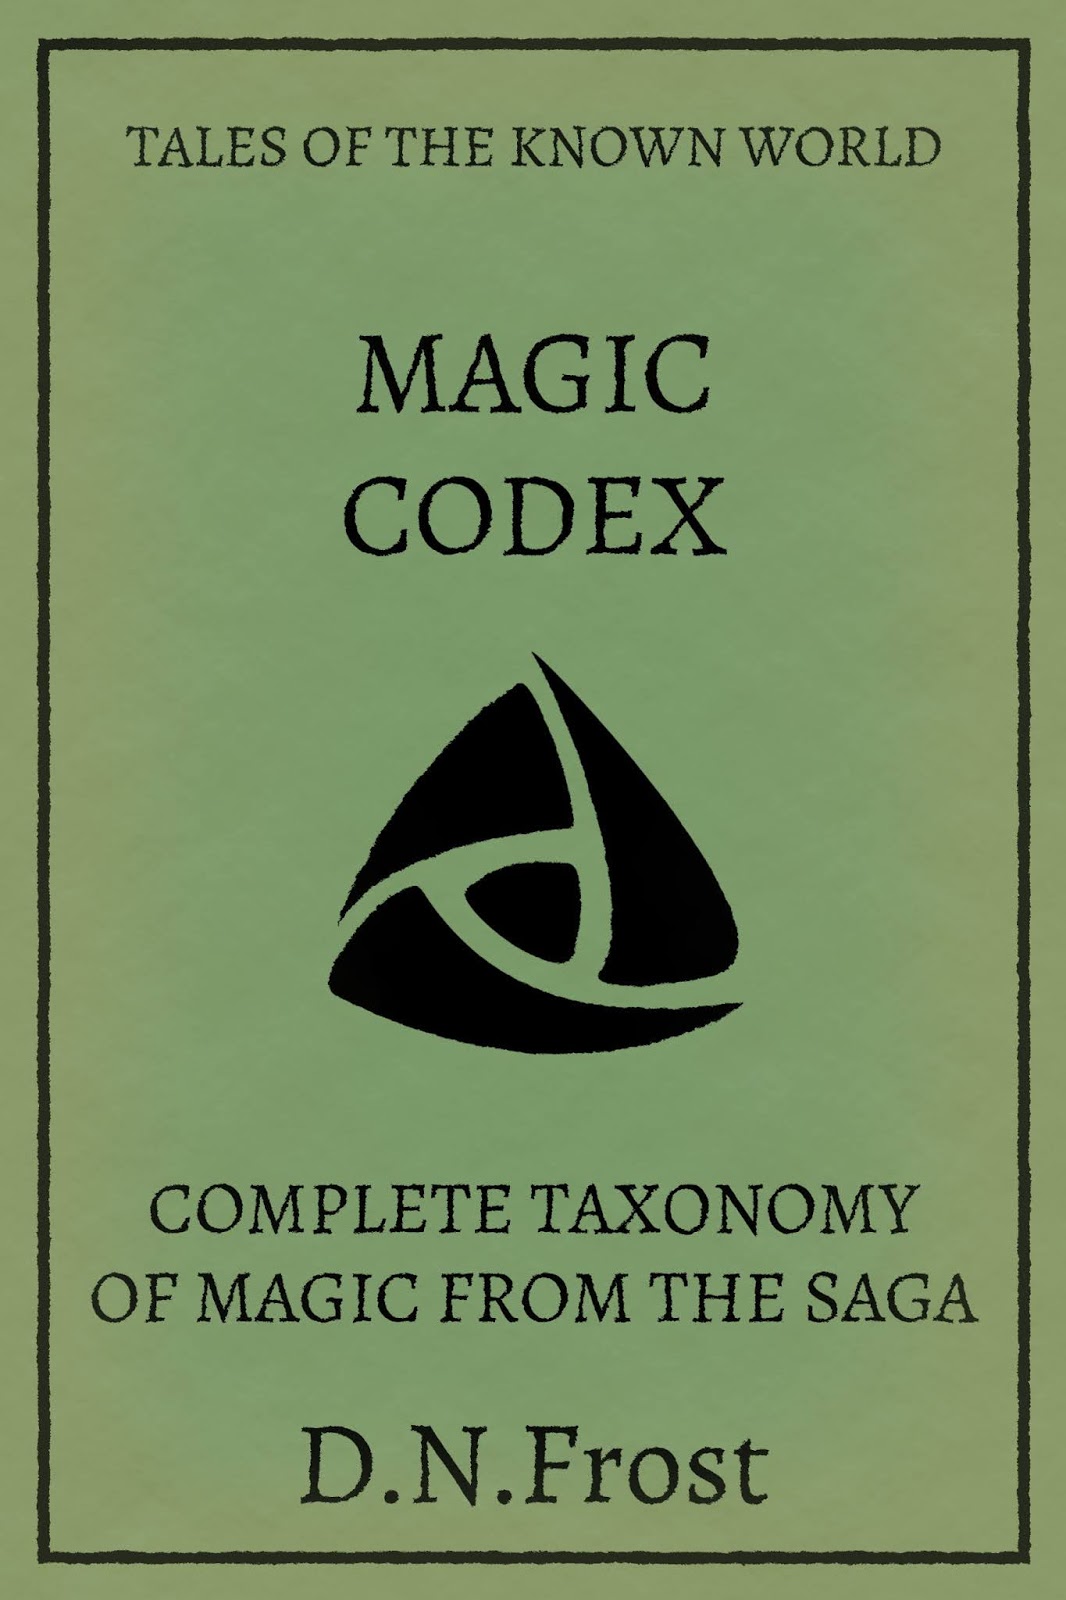 Magic Codex of the Known World: complete taxonomy of magic from the saga. Experience this compendium of magic and discover the saga within. www.DNFrost.com/MagicCodex #TotKW